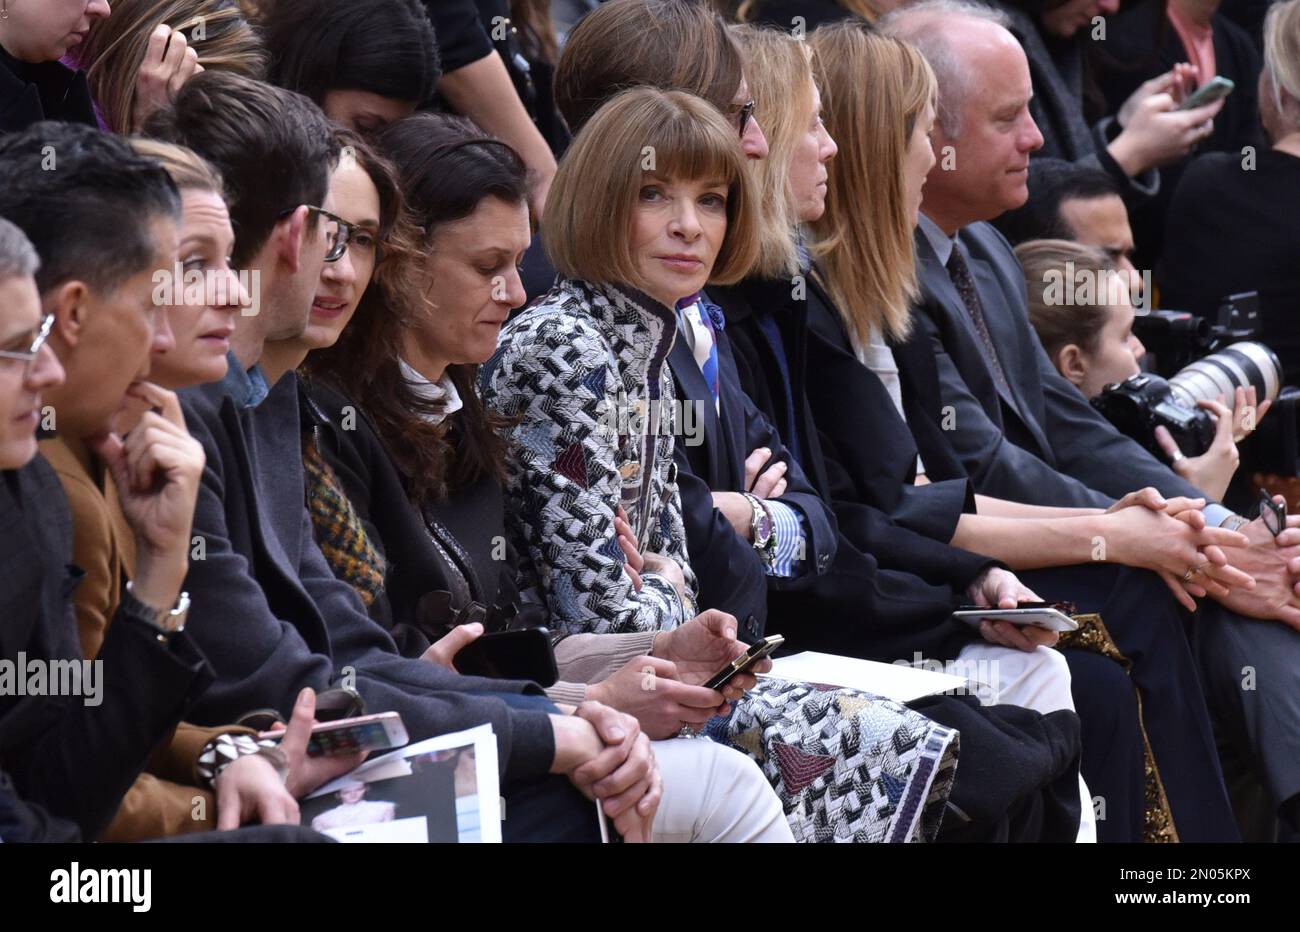 Vogue chief editor Anna Wintour, center, attends Chloe's fall